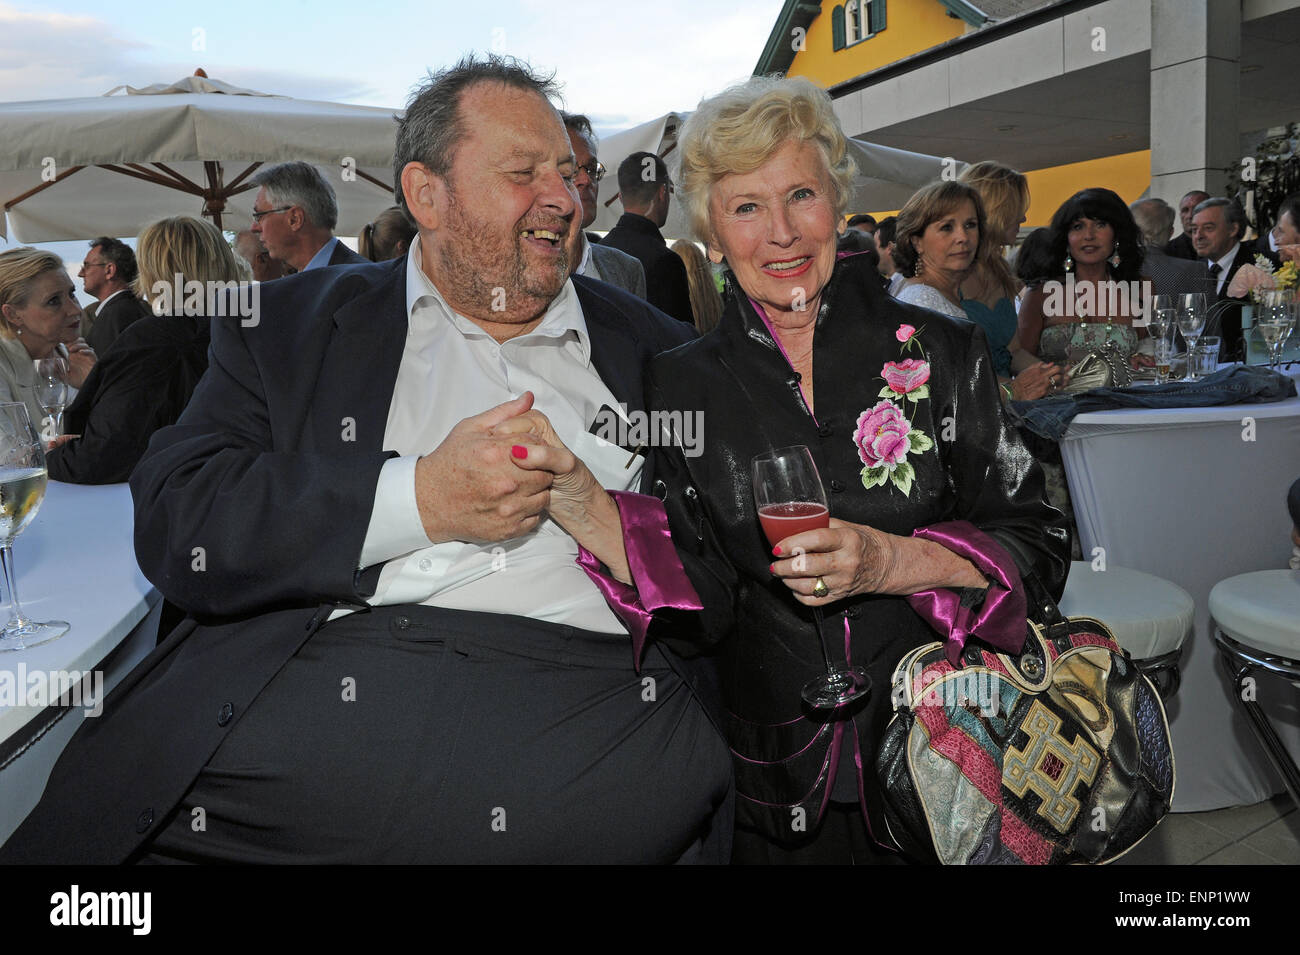 Kaernten, Austria. 08th May, 2015. Actors Ottfried Fischer and Waltraud Haas arrive at the Falkenstein Schlosshotel Velden in Kaernten, Austria, 8 May 2015. The film production association Lisa Film and the Falkenstein Schlosshotel invited celebrities from film, tv and economics for two days in celebration of 25 years of 'Ein Schloss am Wörthersee' . Photo: Ursula Dueren/dpa/Alamy Live News Credit:  dpa picture alliance/Alamy Live News Stock Photo